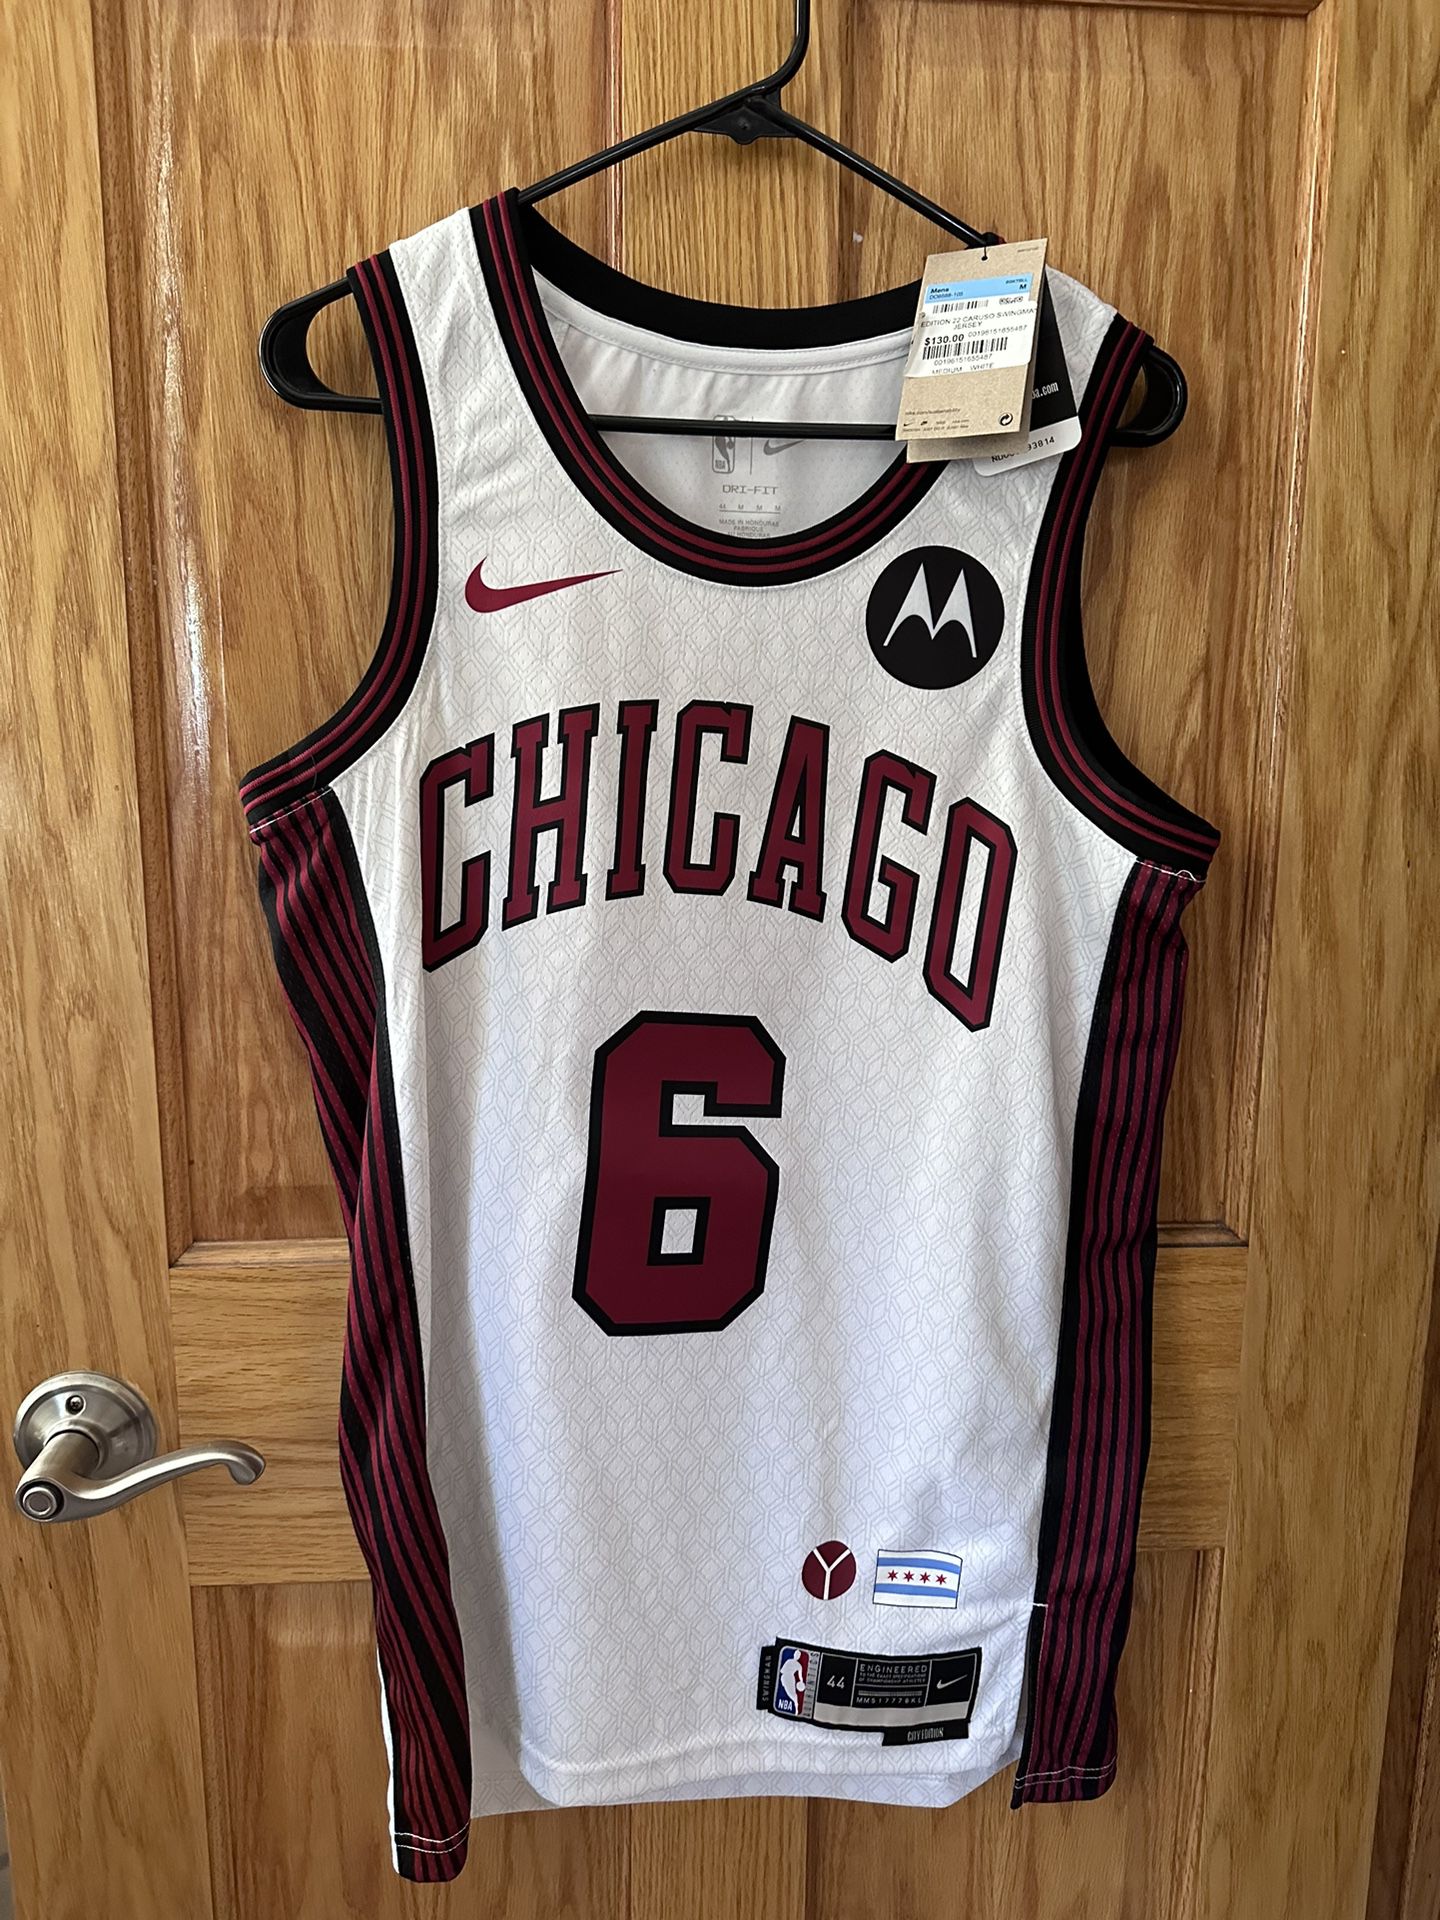 Chicago Bulls Jersey for Sale in Chicago, IL - OfferUp